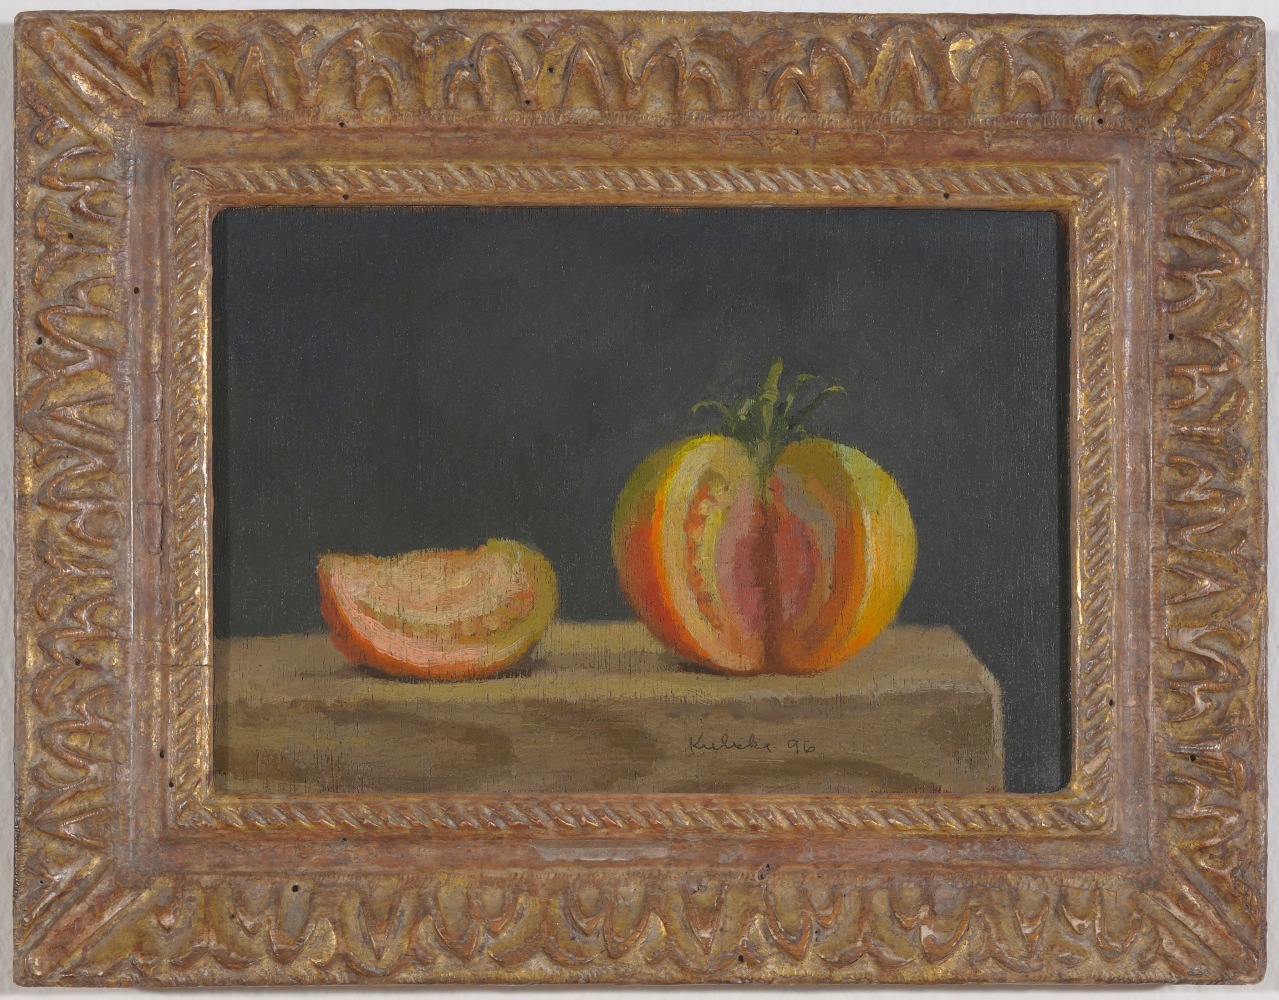 Robert M. Kulicke Red-Green Tomato, Wedge Removed and Alongside, on a Dark Grey Background, 1996 oil on wood panel 6 5/8 x 9 7/16 in.